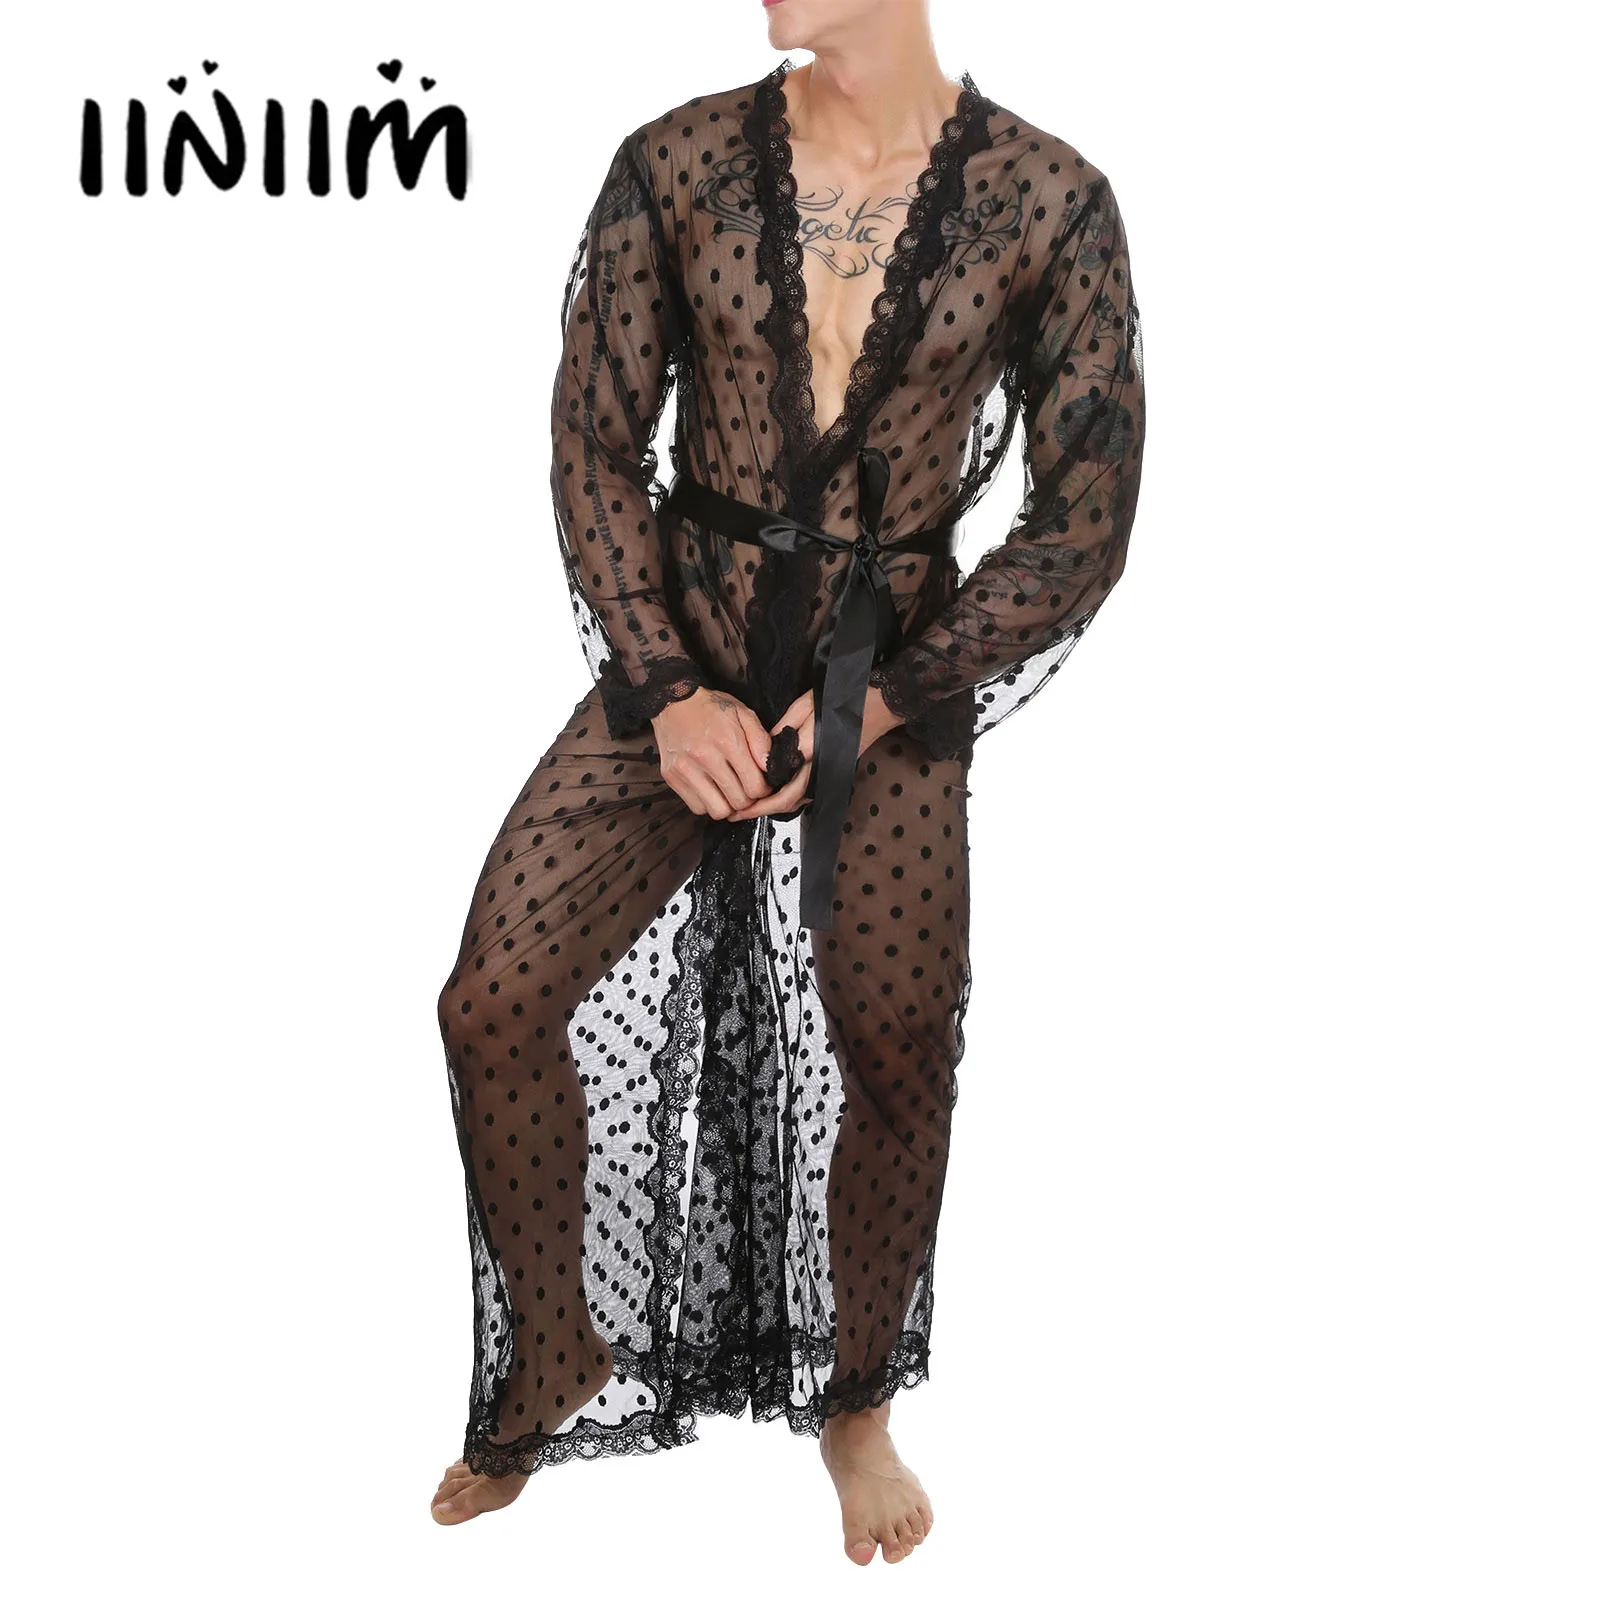 

Mens See-through Mesh Lace Trim Kimono Bathrobe Belted Night-Gown with Lace-up G-string Babydolls Dot Pattern Exotic Nightwear